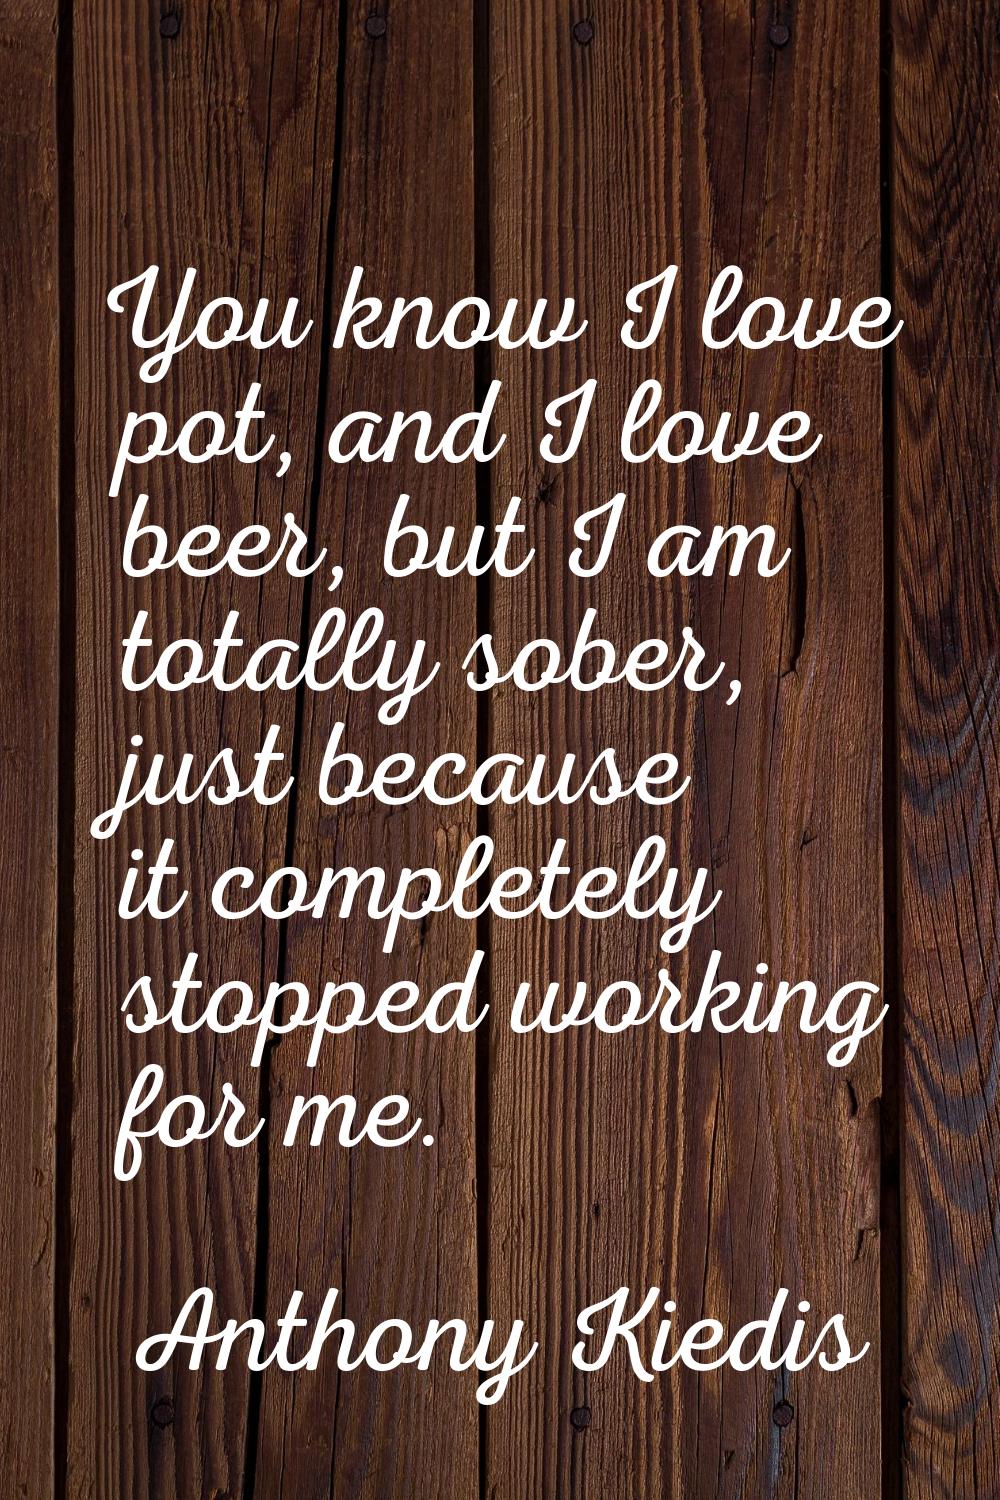 You know I love pot, and I love beer, but I am totally sober, just because it completely stopped wo